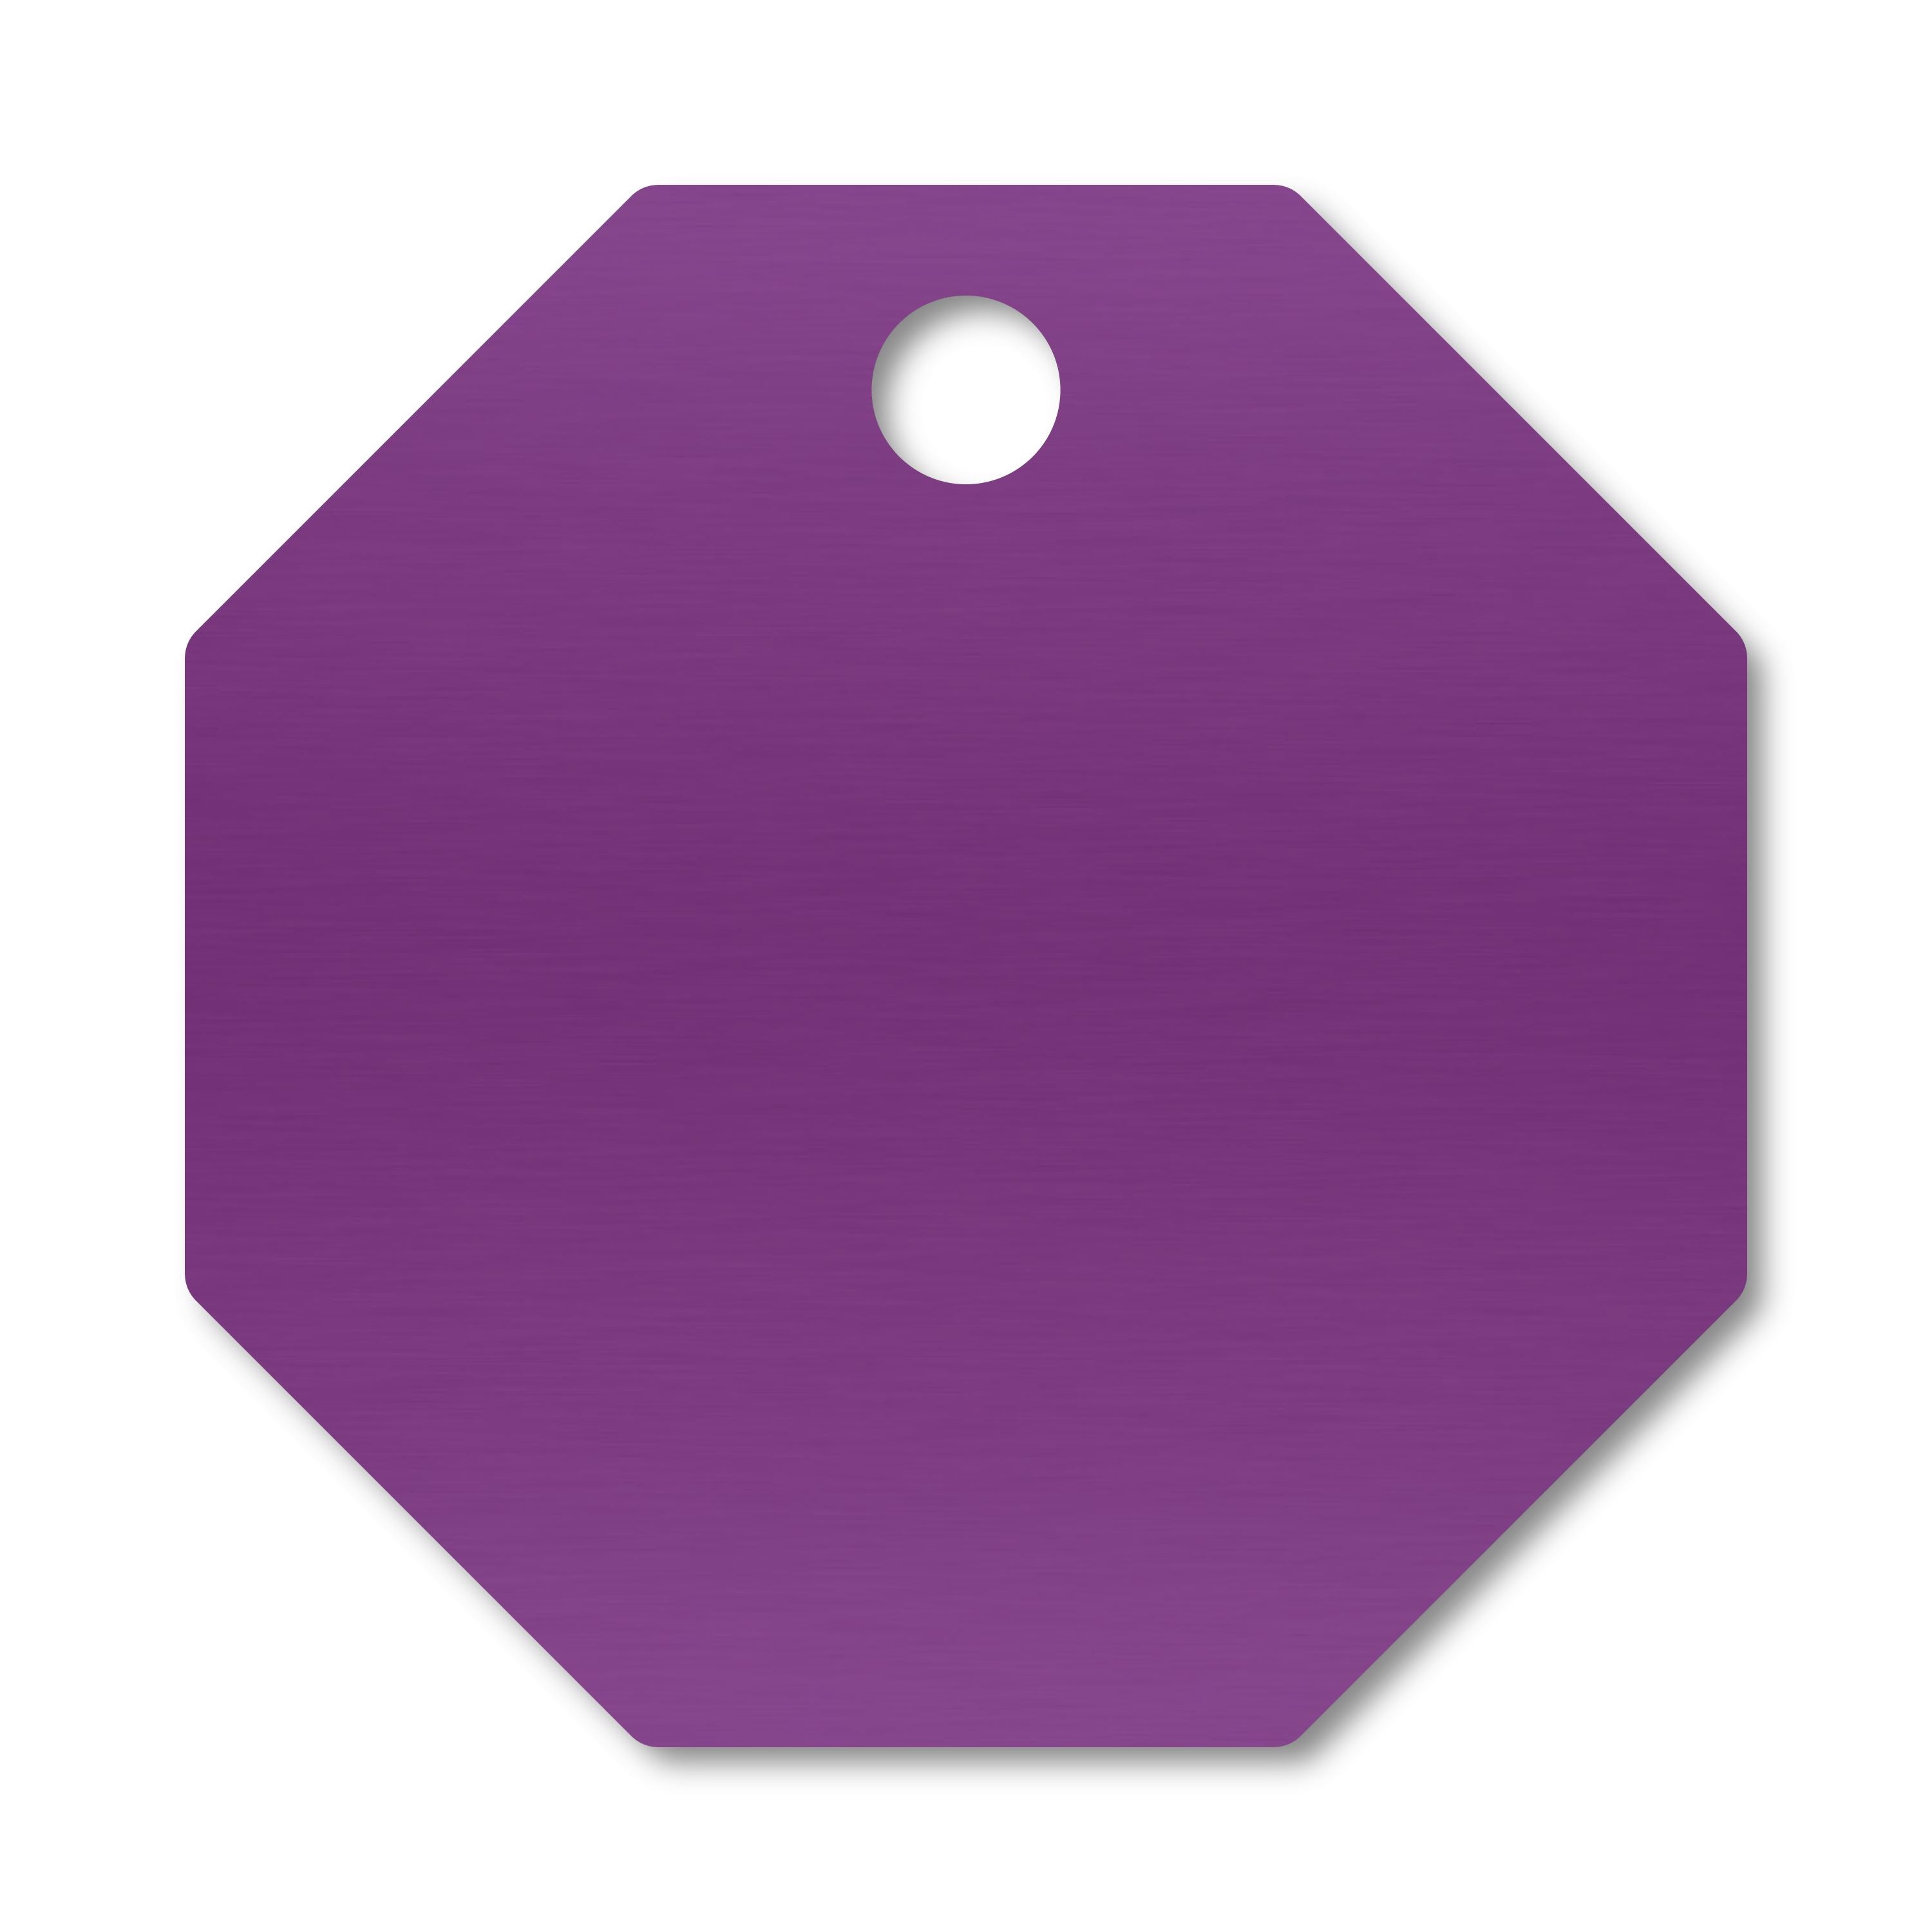 Anodized Aluminum Octagon Tags, 1-1/8" with 1/8" Hole, Laser Engraved Metal Tags Craftworks NW Purple 